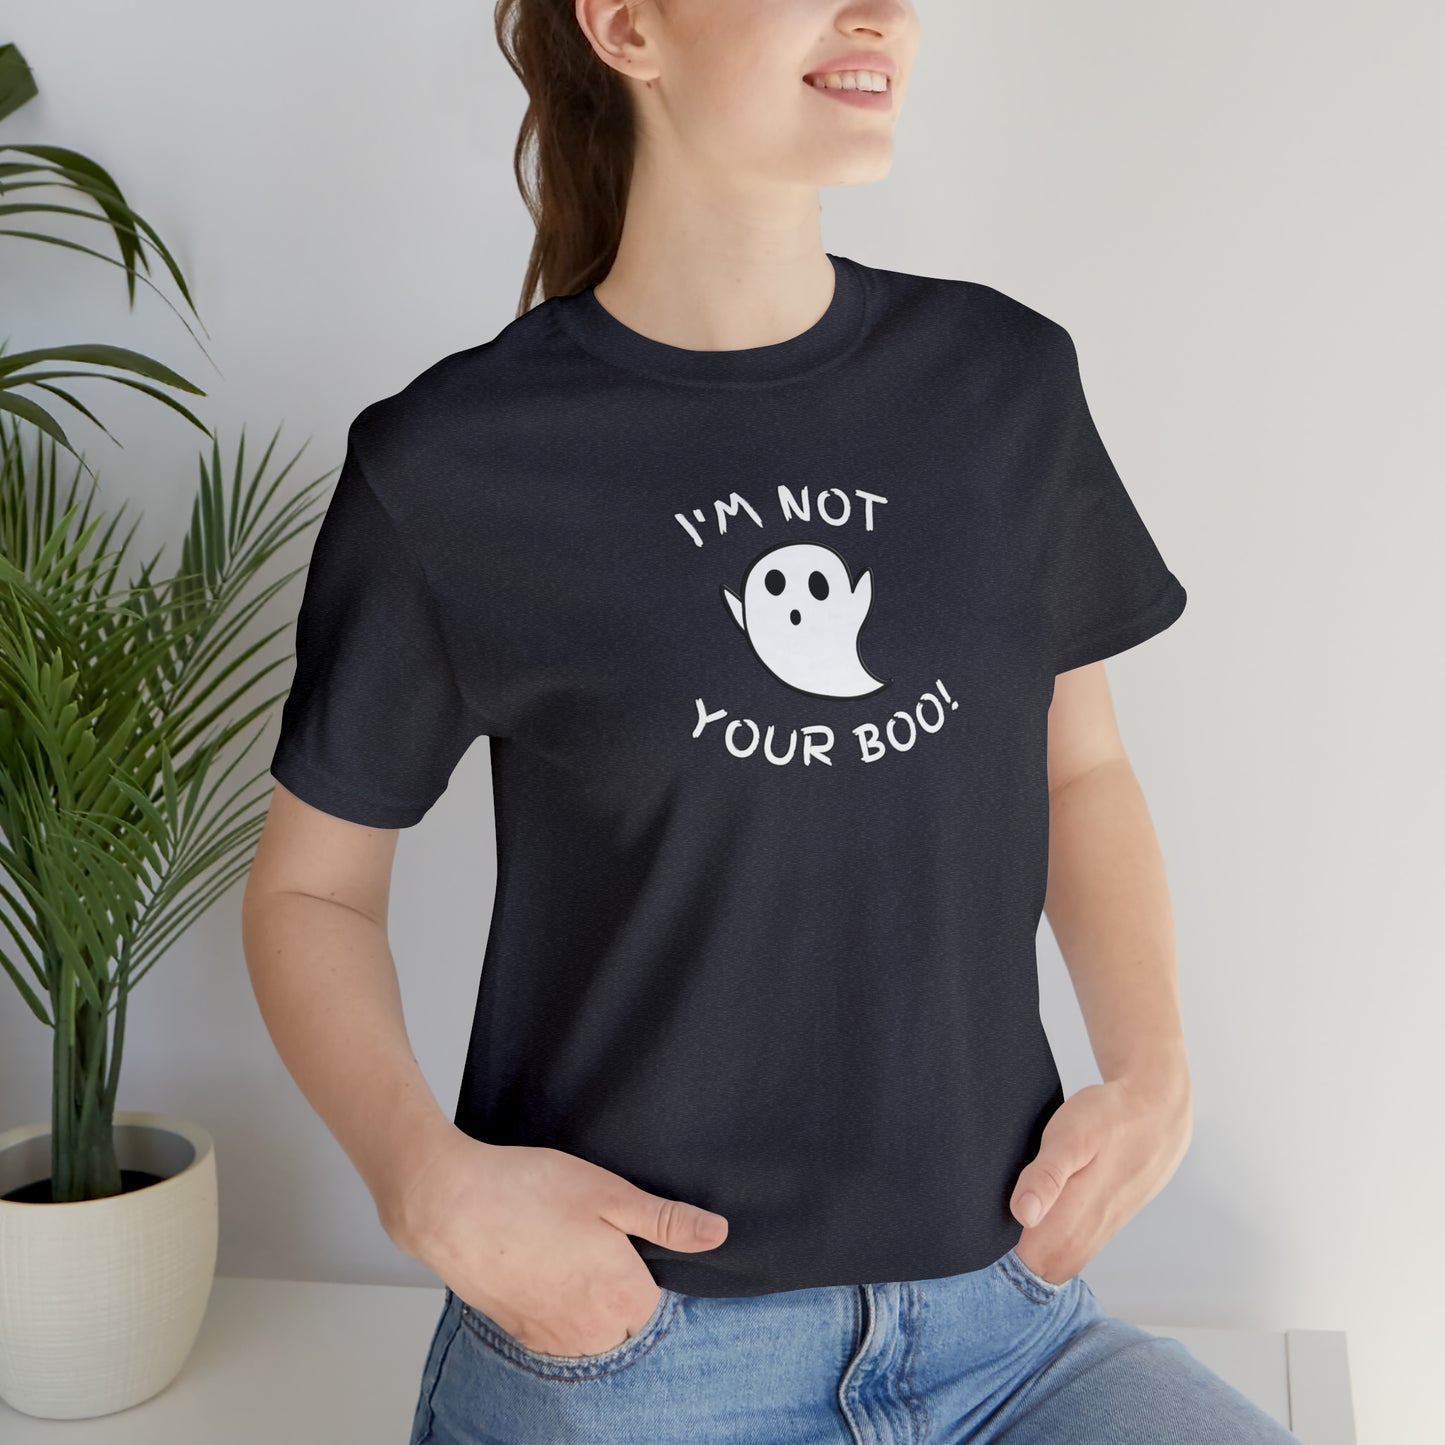 Aesthetic "Not Your Boo" T-shirt, Funny Halloween tee, Sassy and Funny Fall top, Girl Power Autumn Tee, Gift for her, Halloween costume tee